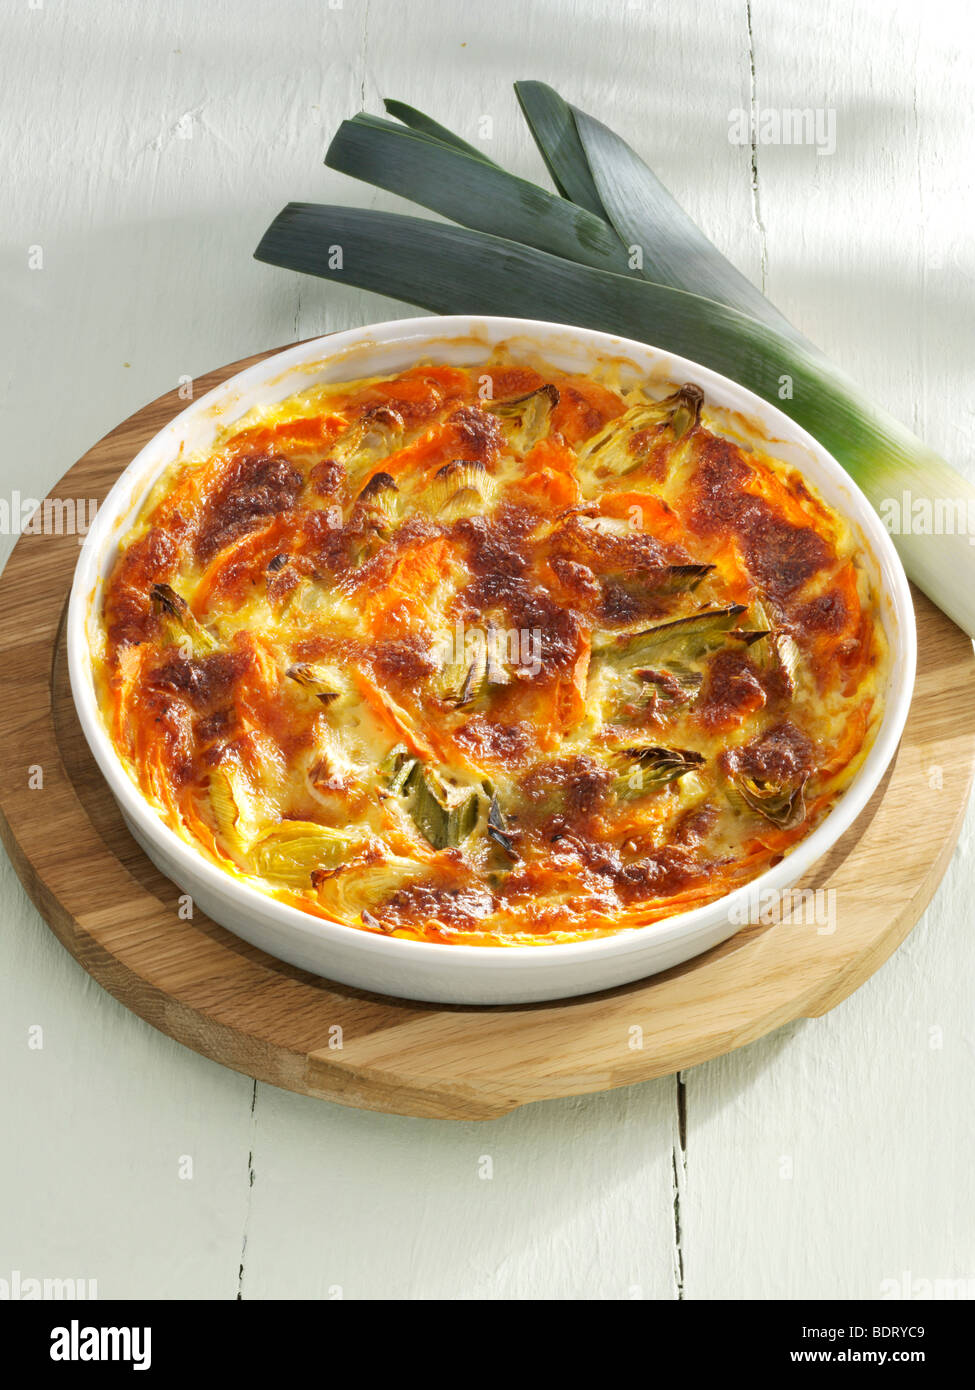 Carrot and leek casserole in a baking dish with leek Stock Photo